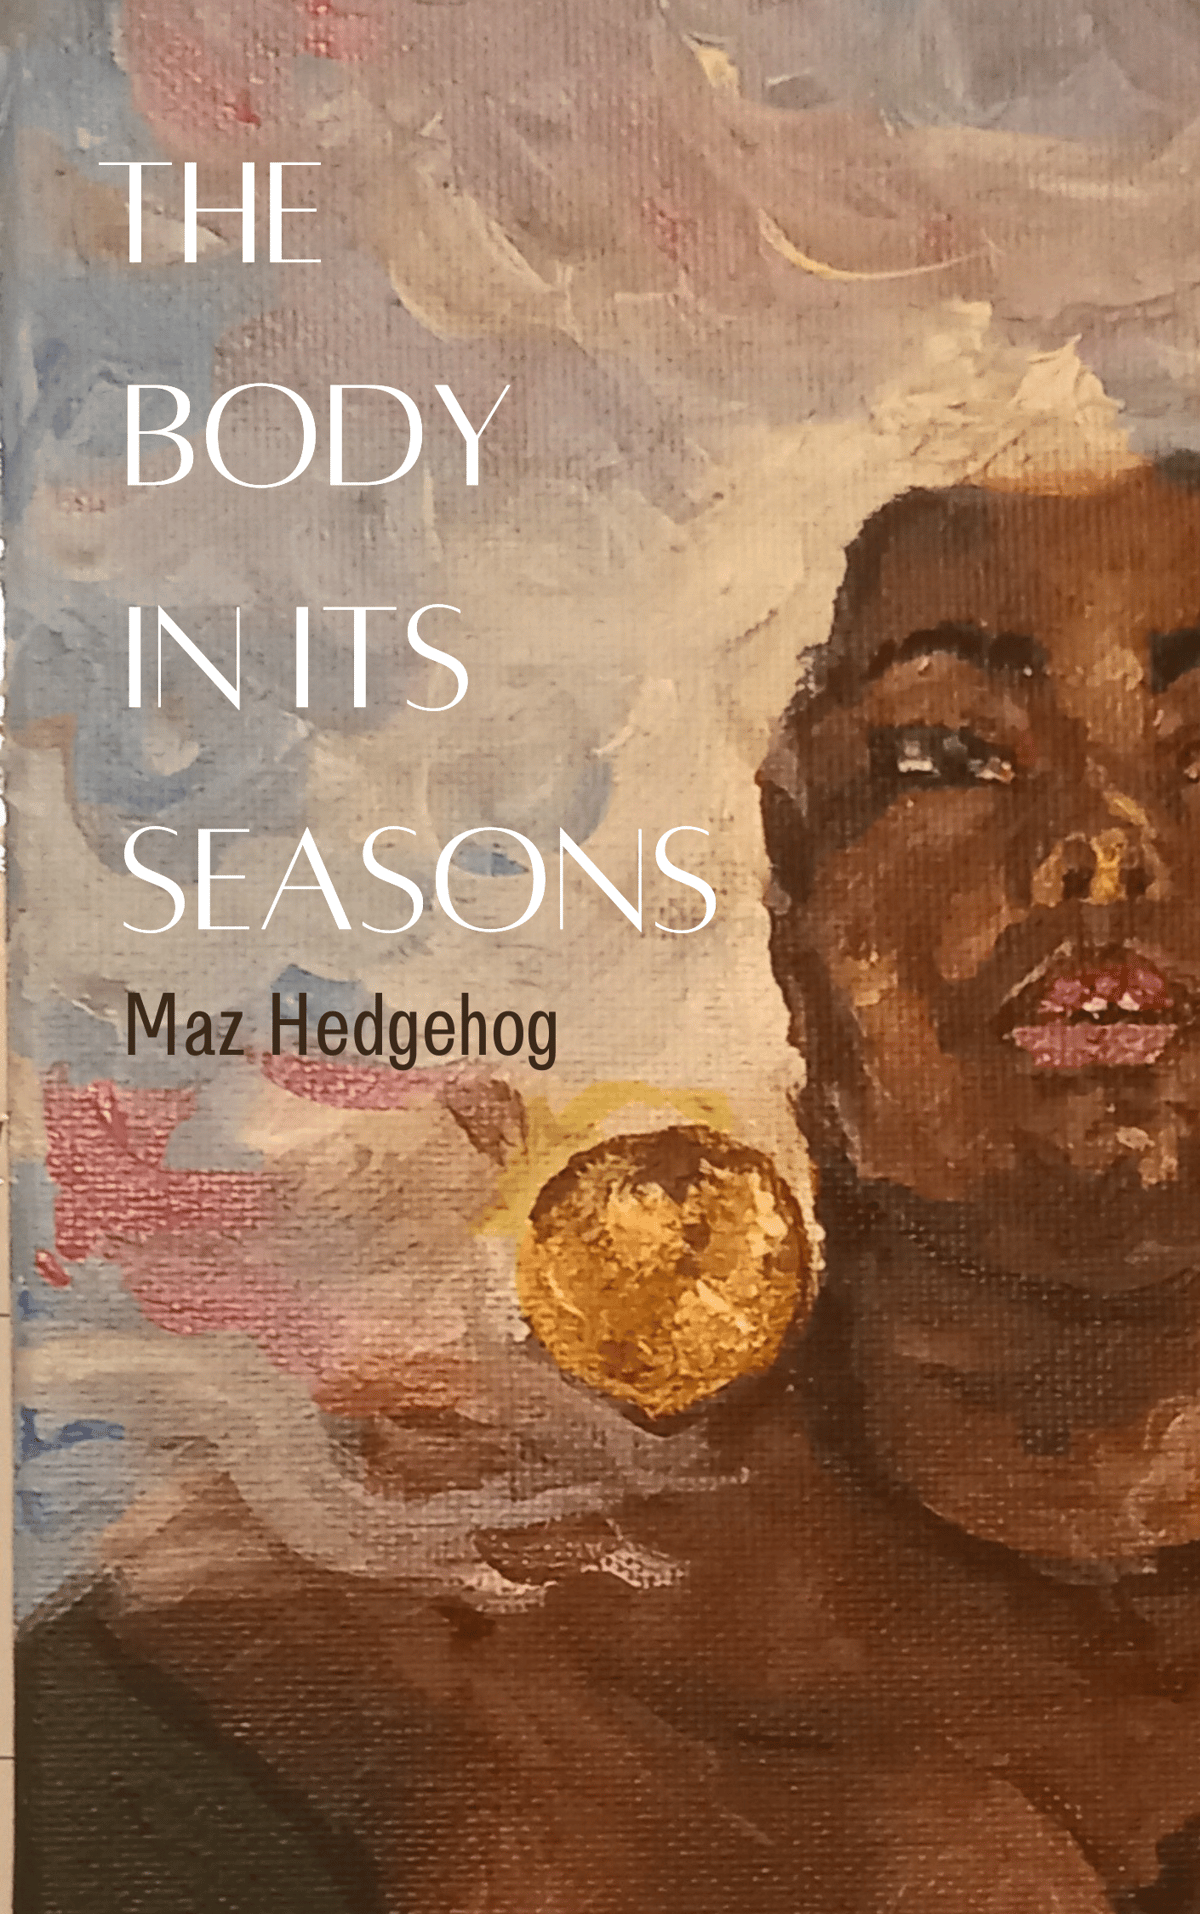 Image of The Body in Its Seasons by Maz Hedgehog